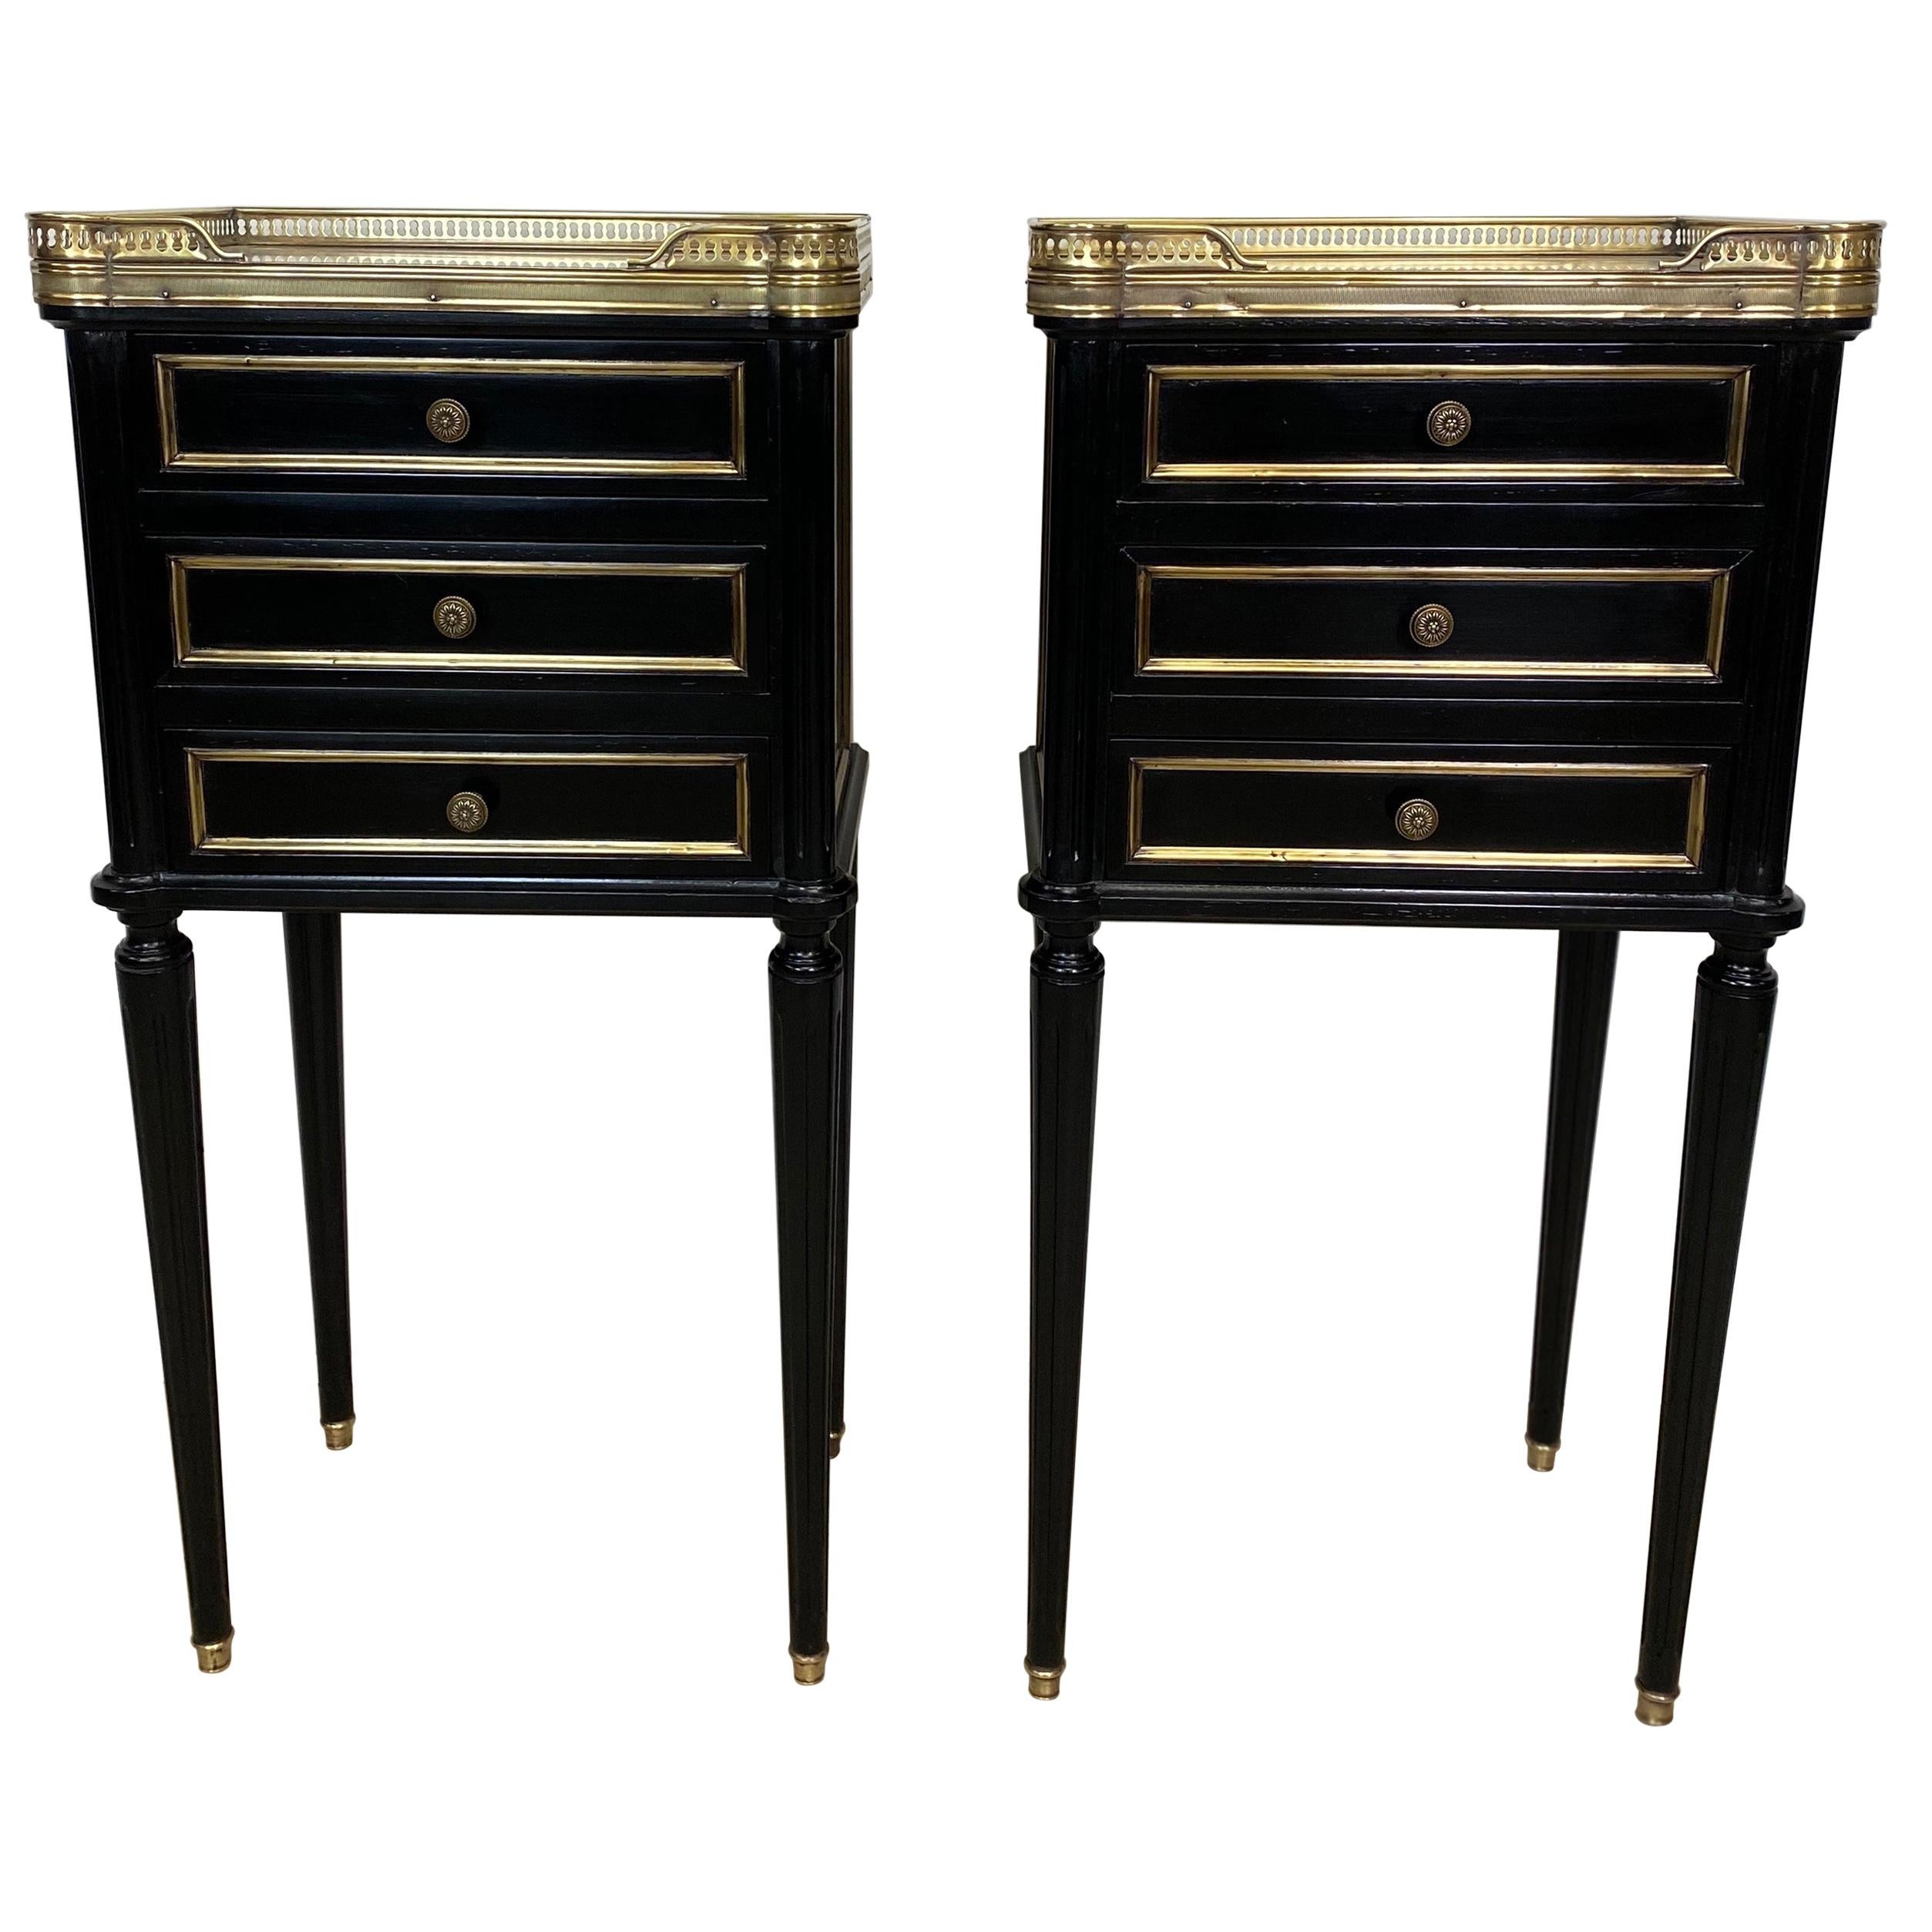 Pair of French Empire Ebonized Nightstands